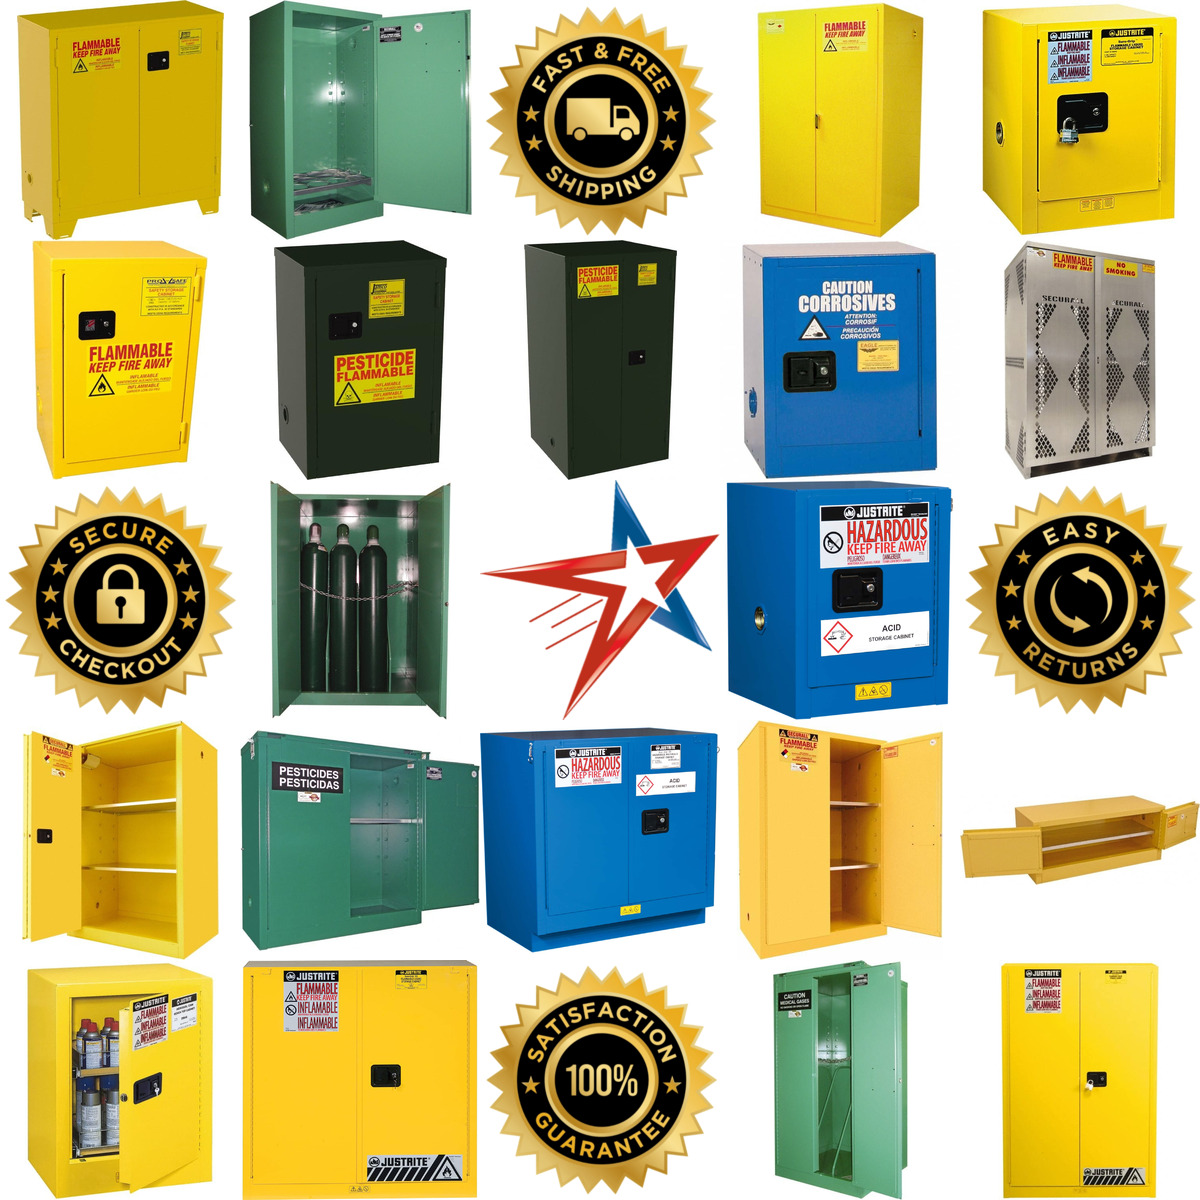 A selection of Safety Cabinets products on GoVets